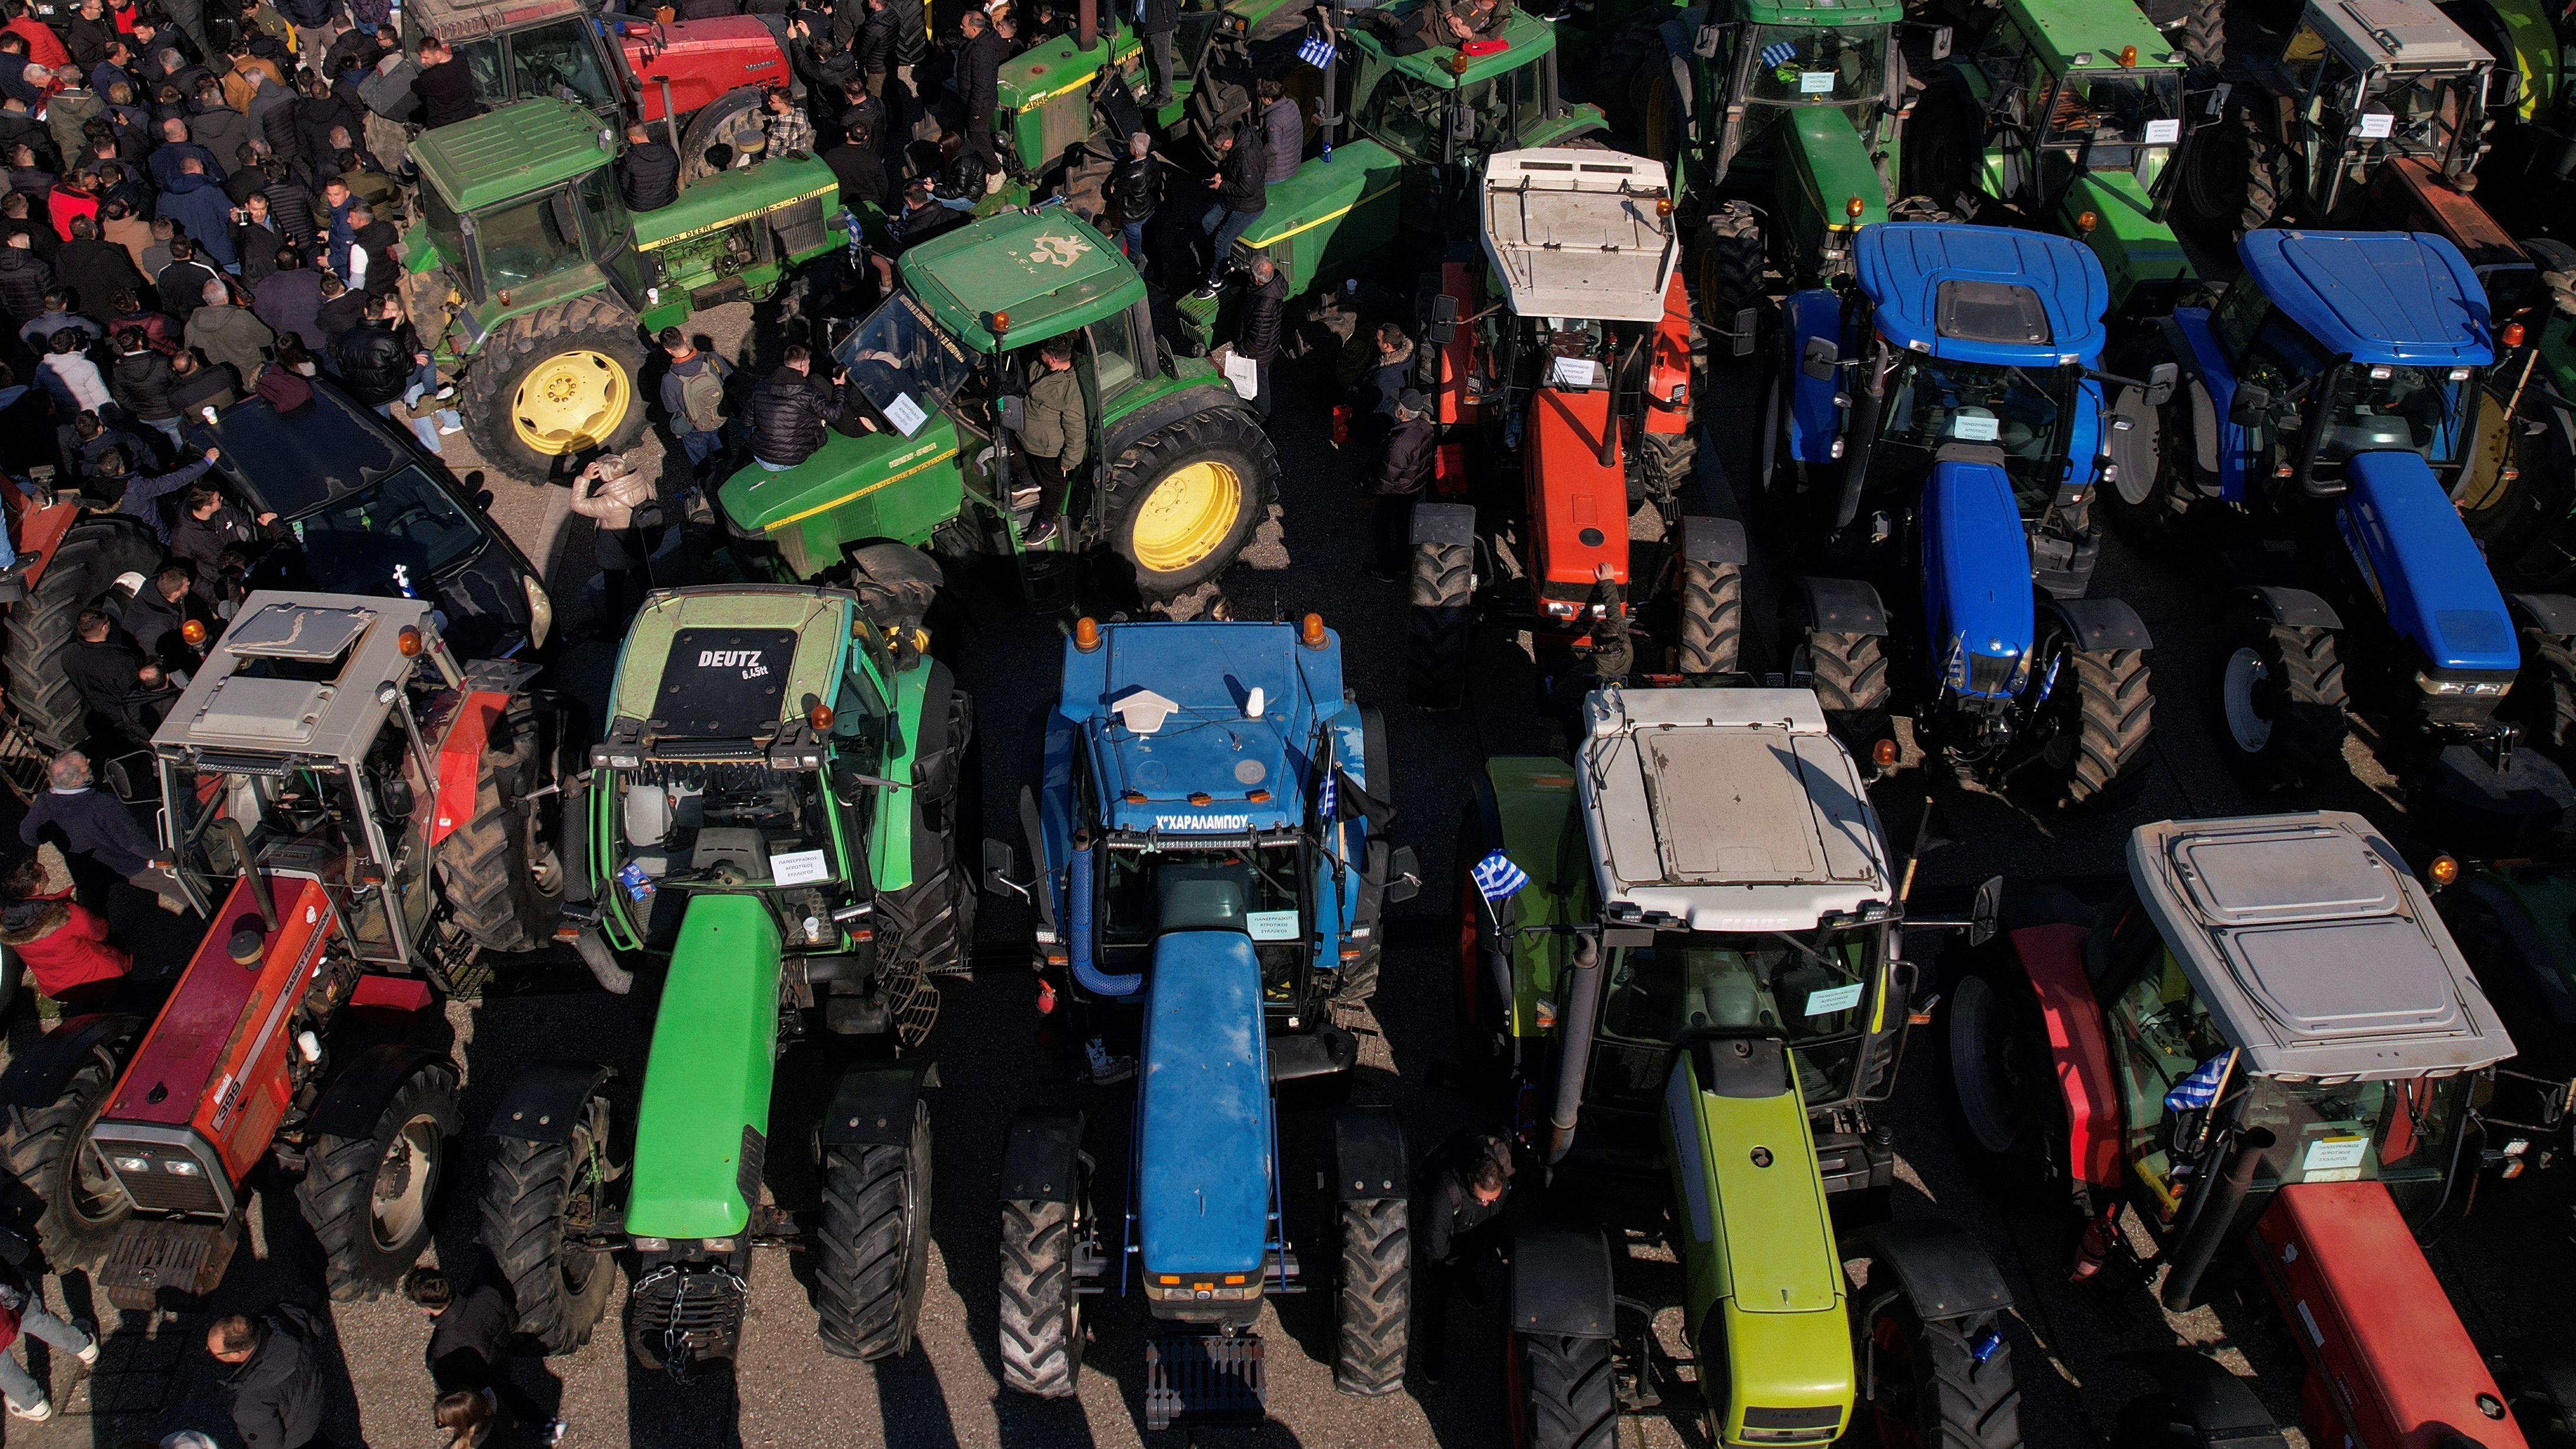 Farmers staged a 'tractor protest' at a fair in Thessaloniki earlier this month. /Alexandros Avramidis/Reuters